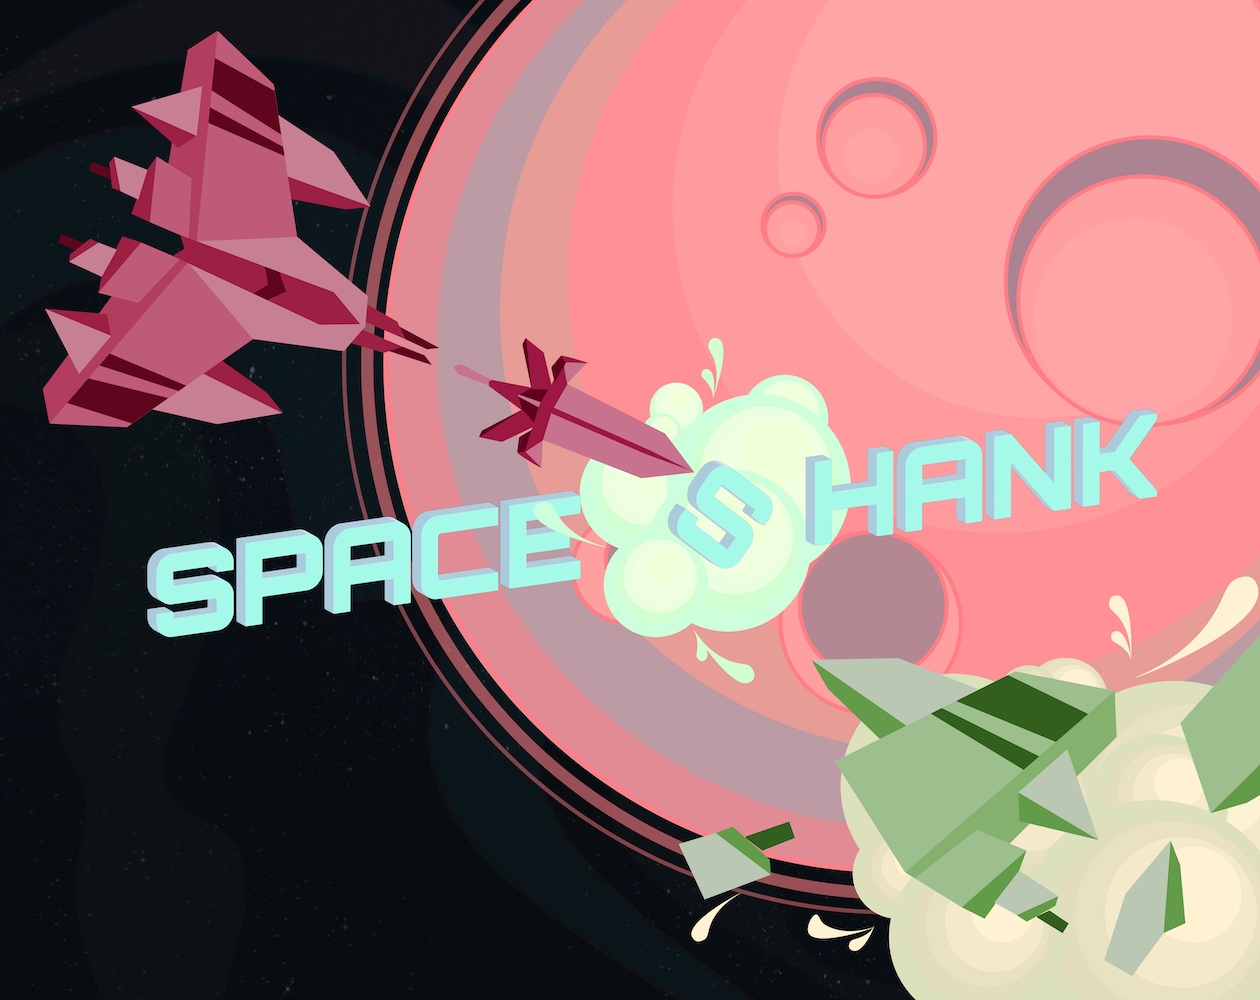 Space Shank